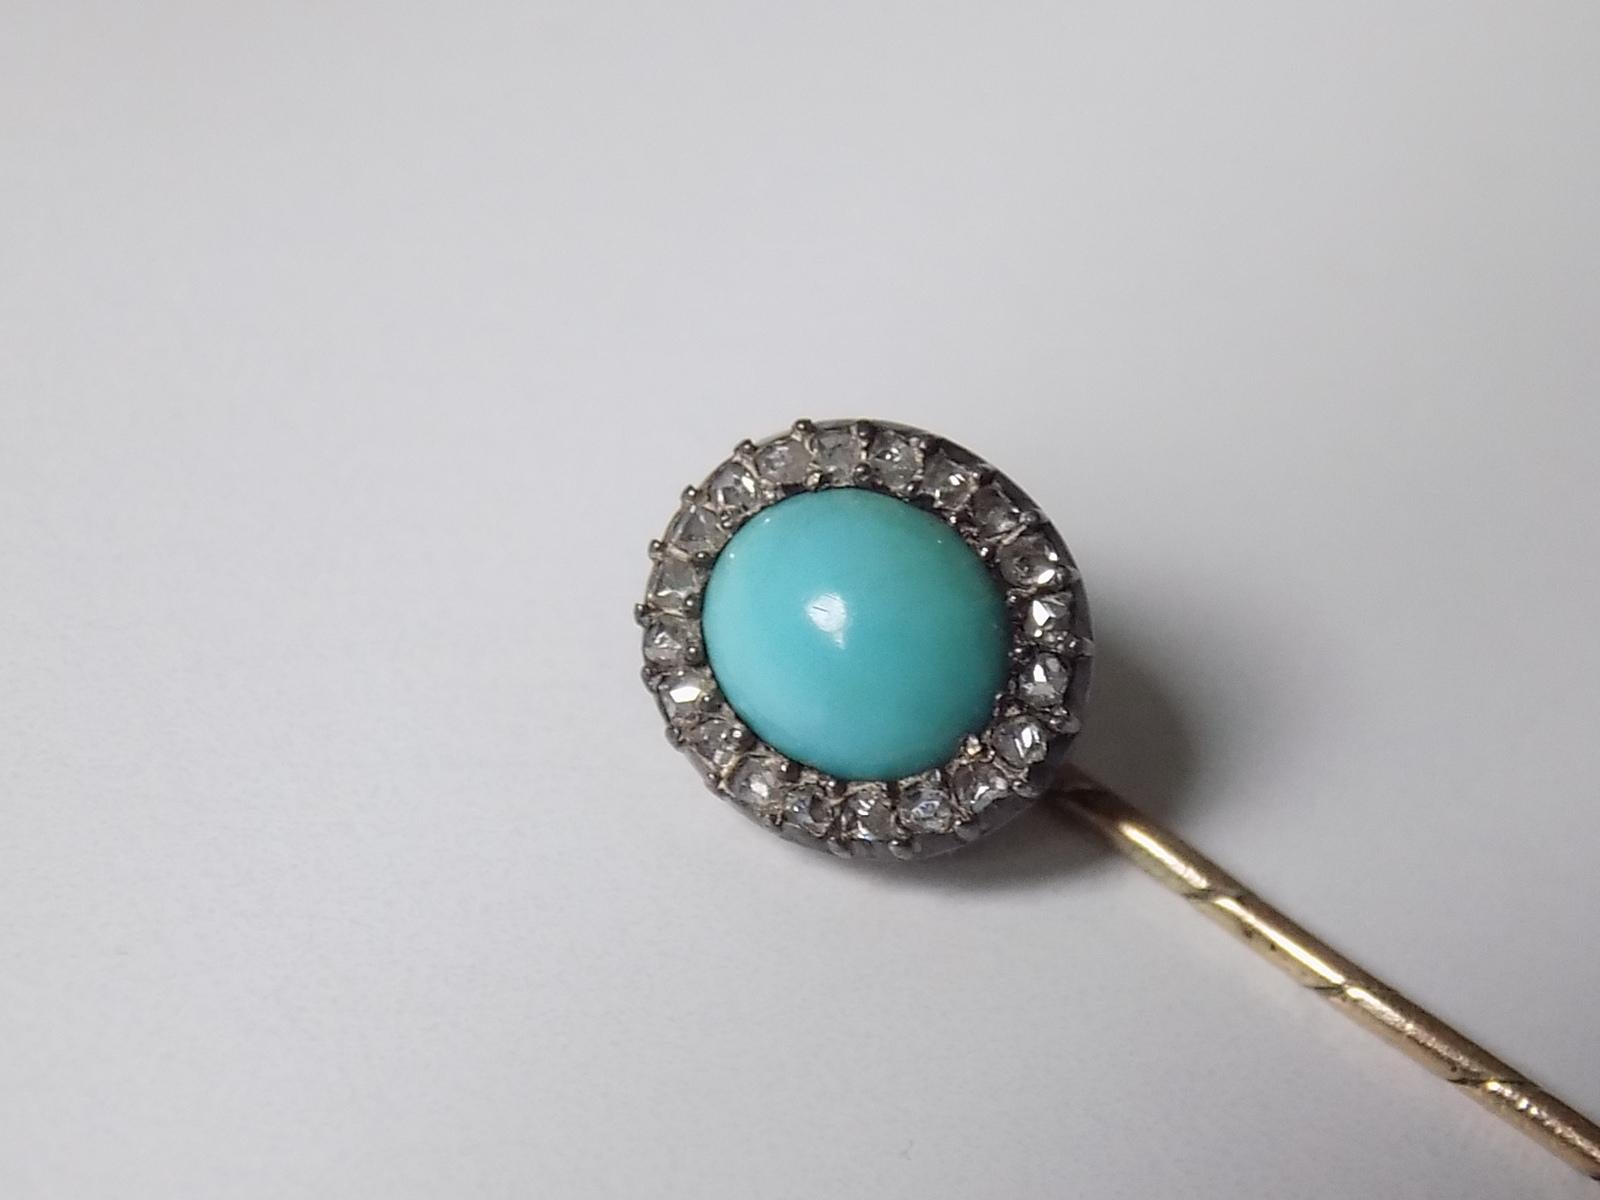 A Victorian c.1890 Rose cut Diamond and Sleeping Beauty Turquoise Stick Pin in Silver and Gold. English origin.
Width of the head 9mm, height 10mm .
Total length of the pin  70mm.
Unmarked.
The pin in good condition for the age, fully complete with